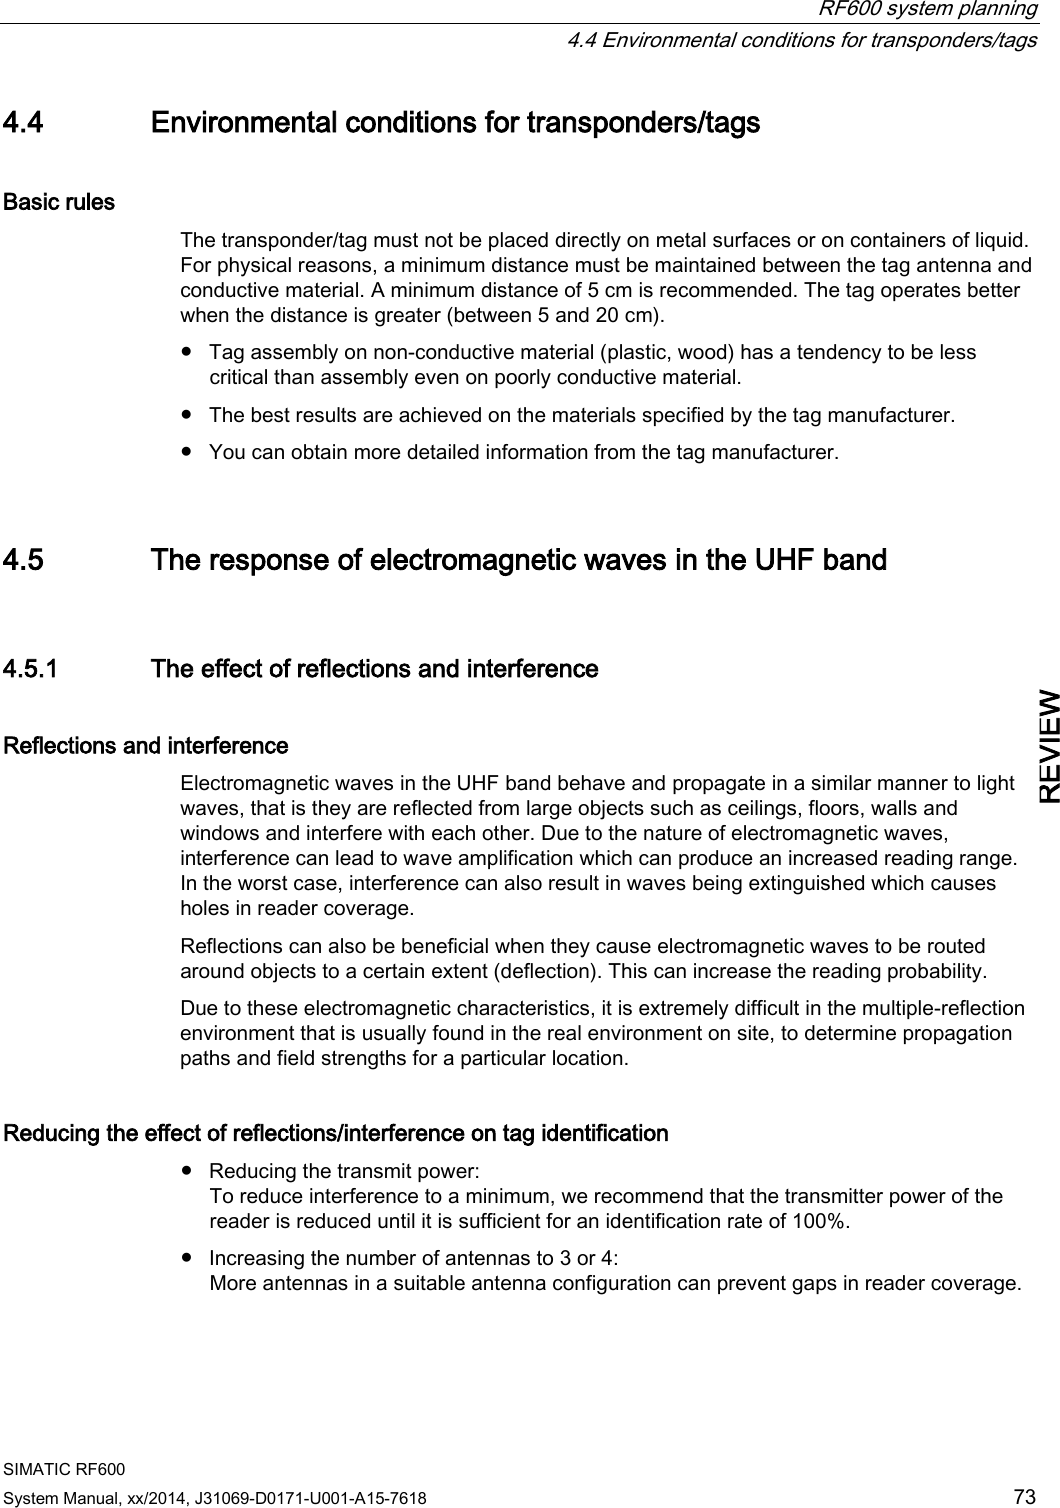  RF600 system planning  4.4 Environmental conditions for transponders/tags SIMATIC RF600 System Manual, xx/2014, J31069-D0171-U001-A15-7618 73 REVIEW 4.4 Environmental conditions for transponders/tags Basic rules The transponder/tag must not be placed directly on metal surfaces or on containers of liquid. For physical reasons, a minimum distance must be maintained between the tag antenna and conductive material. A minimum distance of 5 cm is recommended. The tag operates better when the distance is greater (between 5 and 20 cm). ● Tag assembly on non-conductive material (plastic, wood) has a tendency to be less critical than assembly even on poorly conductive material. ● The best results are achieved on the materials specified by the tag manufacturer. ● You can obtain more detailed information from the tag manufacturer. 4.5 The response of electromagnetic waves in the UHF band 4.5.1 The effect of reflections and interference Reflections and interference Electromagnetic waves in the UHF band behave and propagate in a similar manner to light waves, that is they are reflected from large objects such as ceilings, floors, walls and windows and interfere with each other. Due to the nature of electromagnetic waves, interference can lead to wave amplification which can produce an increased reading range. In the worst case, interference can also result in waves being extinguished which causes holes in reader coverage. Reflections can also be beneficial when they cause electromagnetic waves to be routed around objects to a certain extent (deflection). This can increase the reading probability. Due to these electromagnetic characteristics, it is extremely difficult in the multiple-reflection environment that is usually found in the real environment on site, to determine propagation paths and field strengths for a particular location. Reducing the effect of reflections/interference on tag identification ● Reducing the transmit power:  To reduce interference to a minimum, we recommend that the transmitter power of the reader is reduced until it is sufficient for an identification rate of 100%. ● Increasing the number of antennas to 3 or 4:  More antennas in a suitable antenna configuration can prevent gaps in reader coverage. 